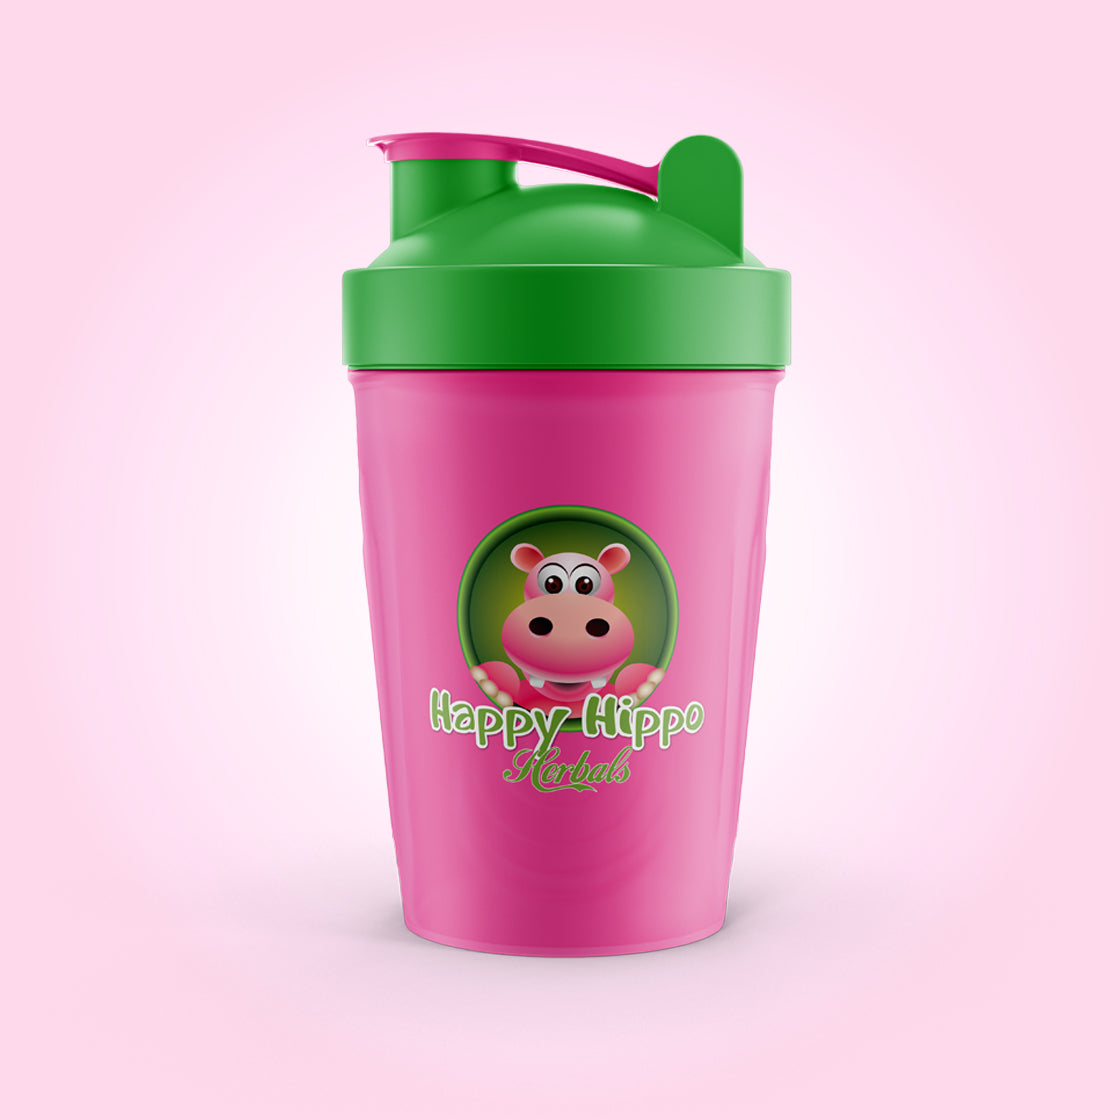 Product Image depicting a pink and green Shaker Bottle used to make blended drinks. The shaker bottle has a flip top closure, and the Happy Hippo Herbals logo  on the side.